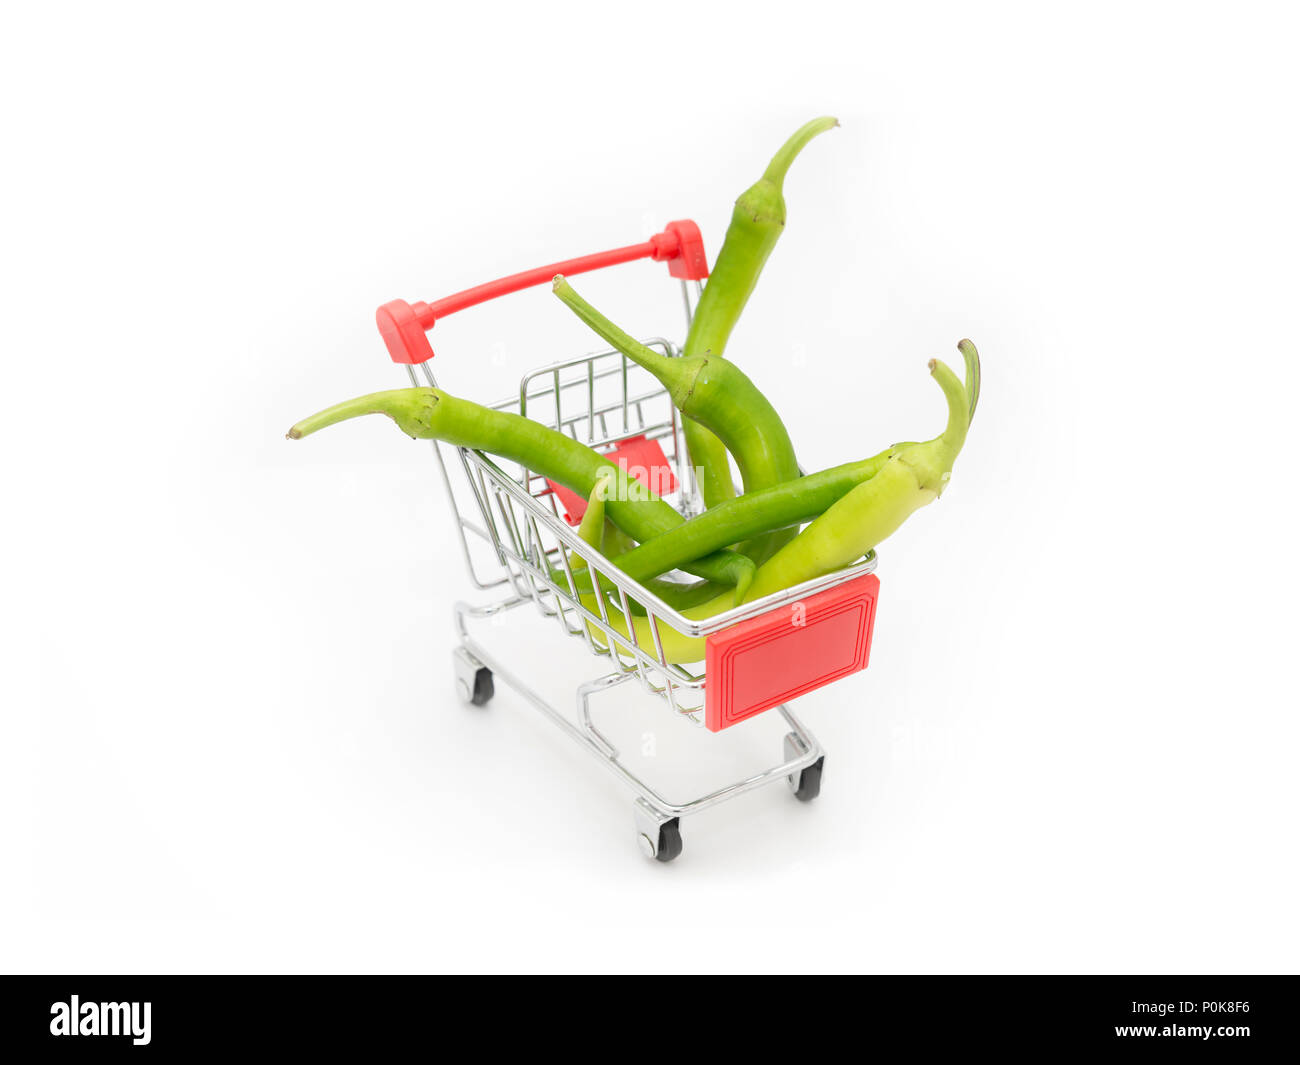 Green Peppers Loaded On A Shopping Cart, Isolated On White Background Stock Photo